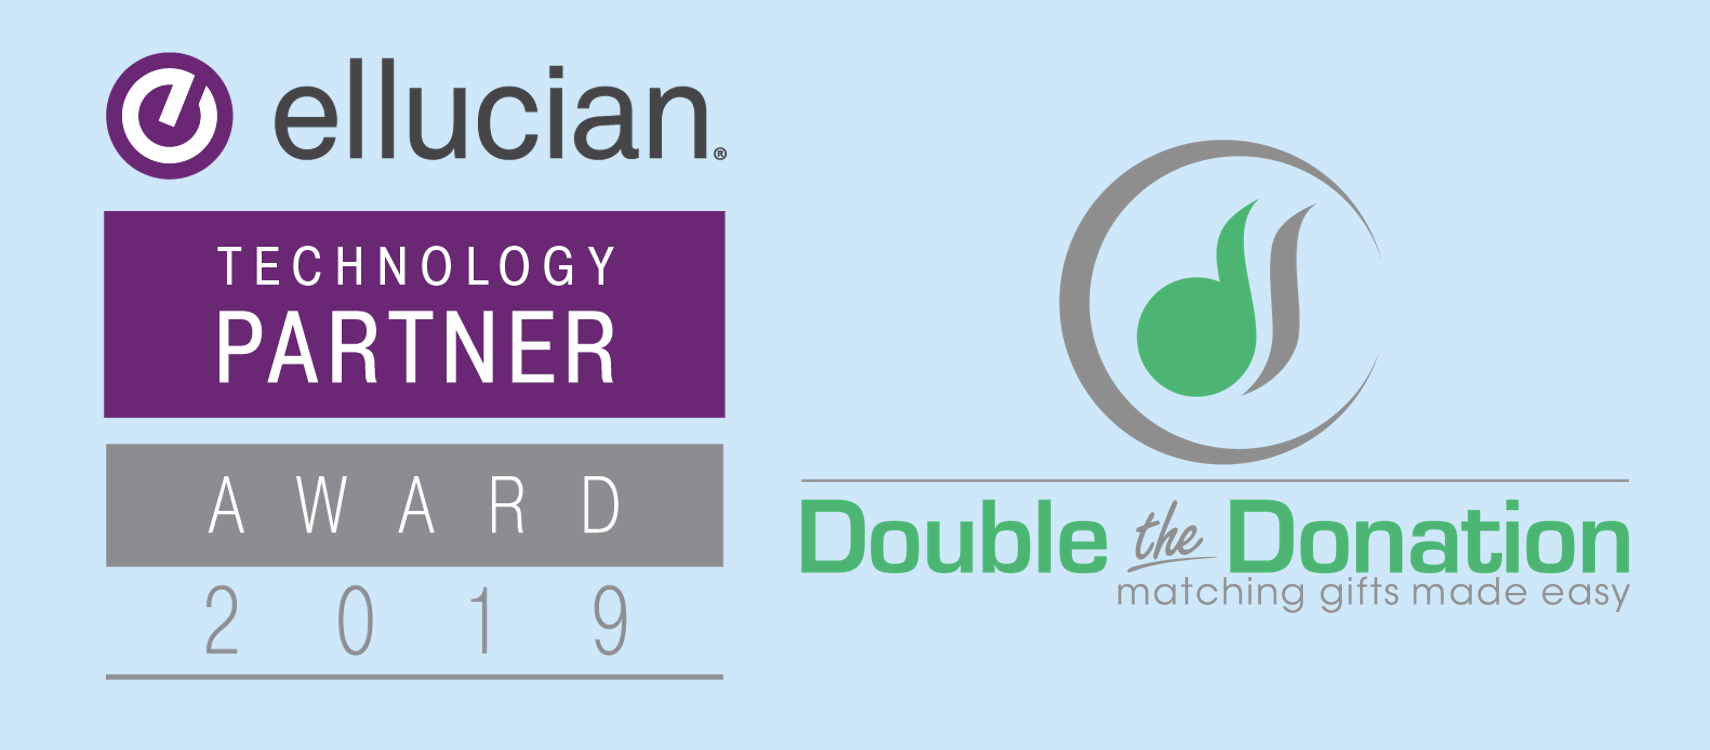 2019 Ellucian Tech Partner Award for Ethos Excellence goes to Double the Donation